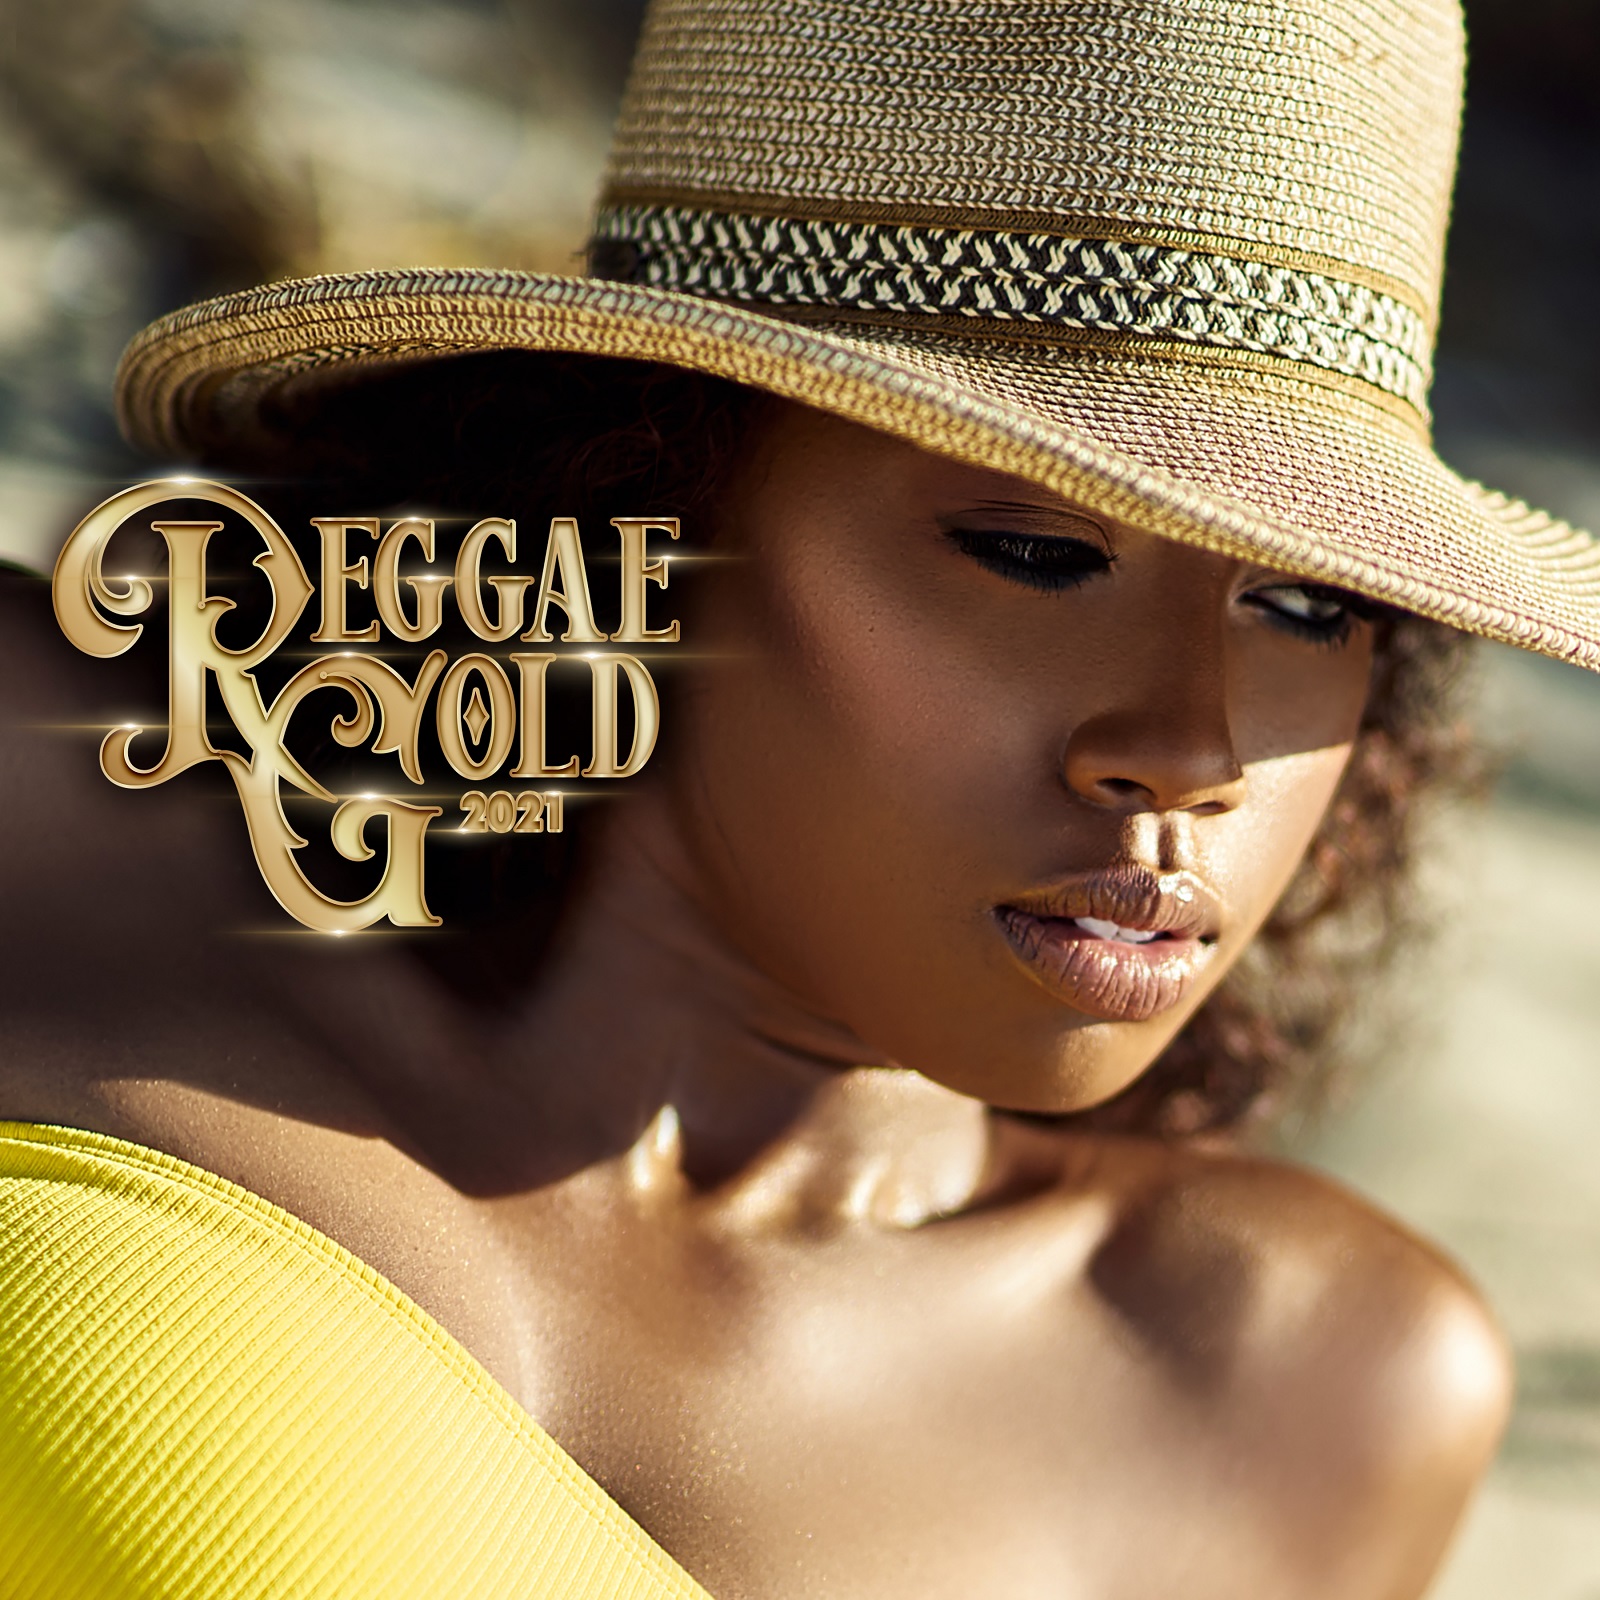 Reggae Gold 2021 Just Dropped!